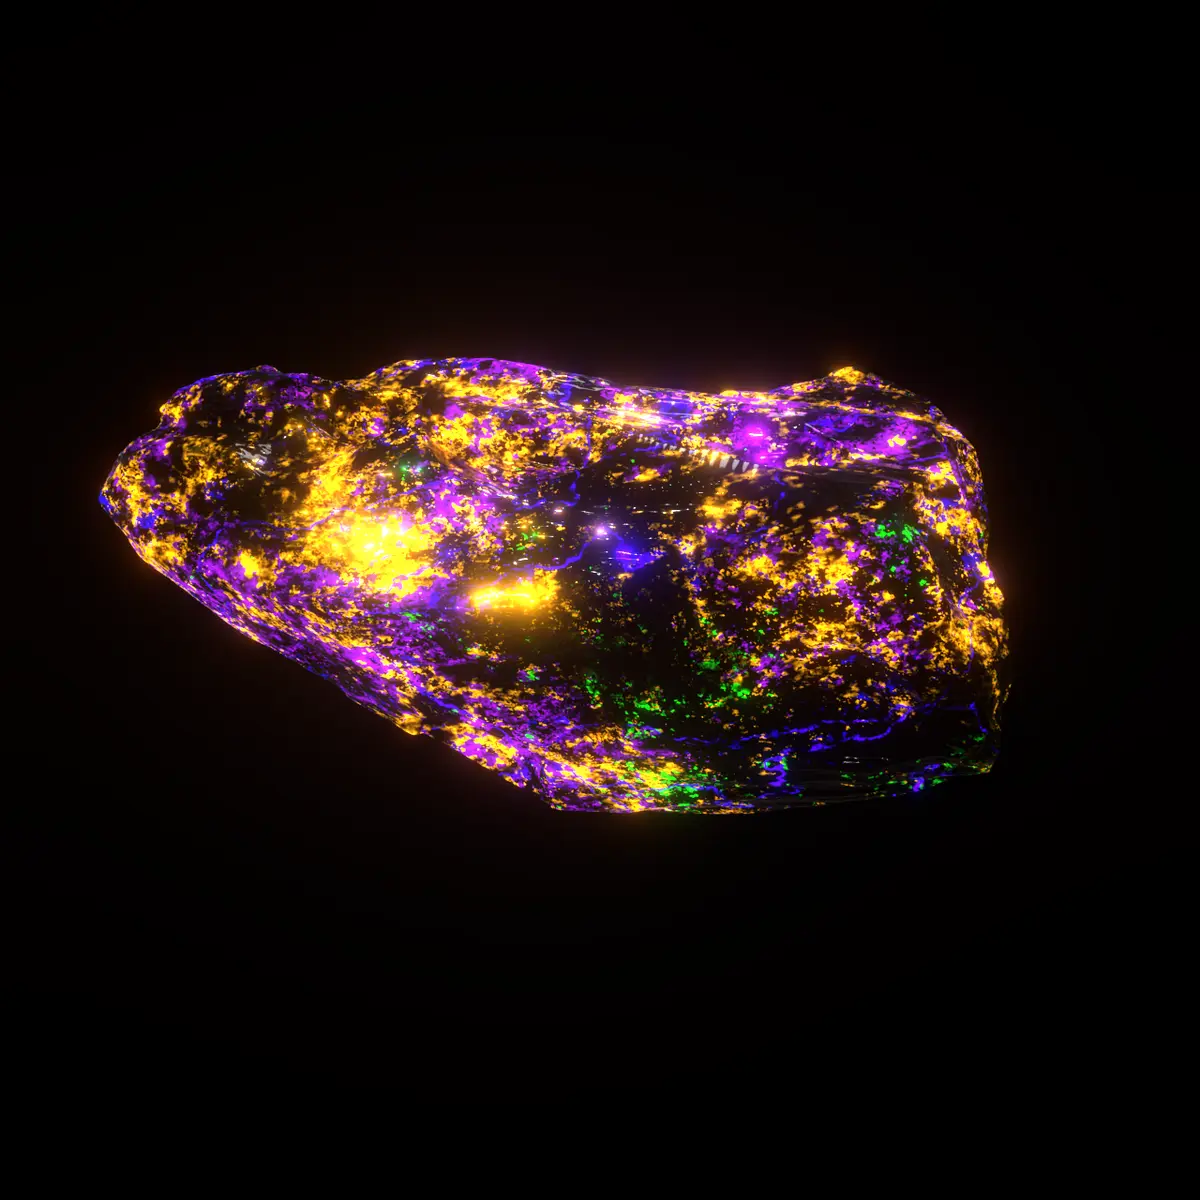 A multi-colored stone glowing in shades of magenta, yellow, blue, and green against a black background.